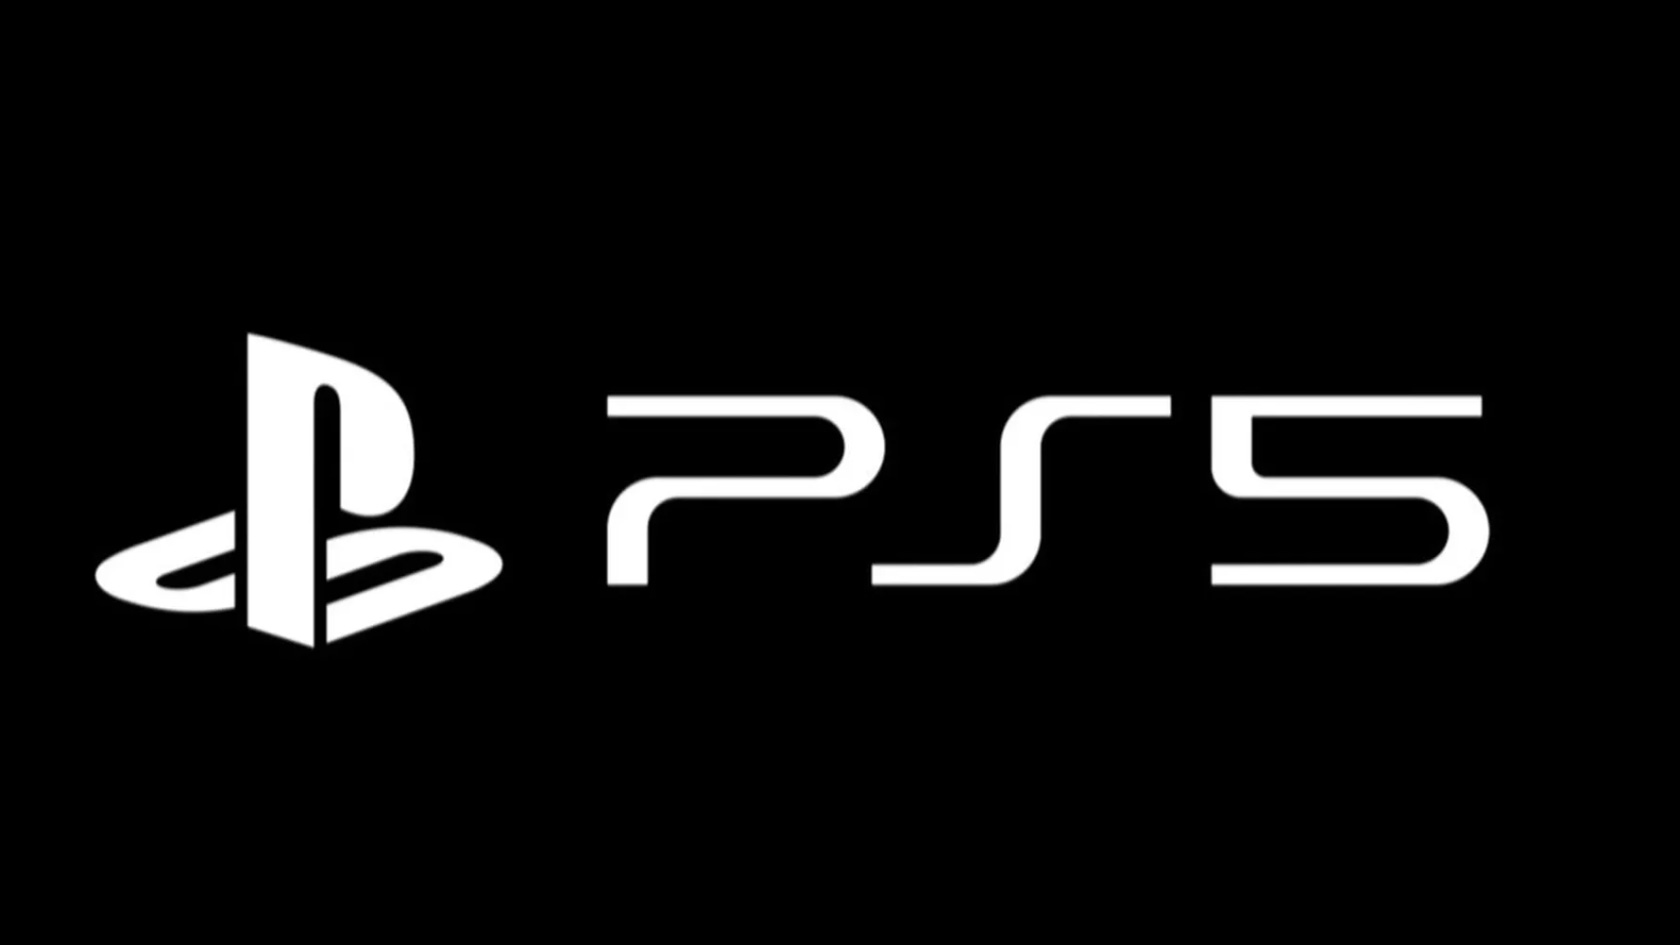 Designers react to the new PS5 logo (and it's not pretty) | Creative Bloq